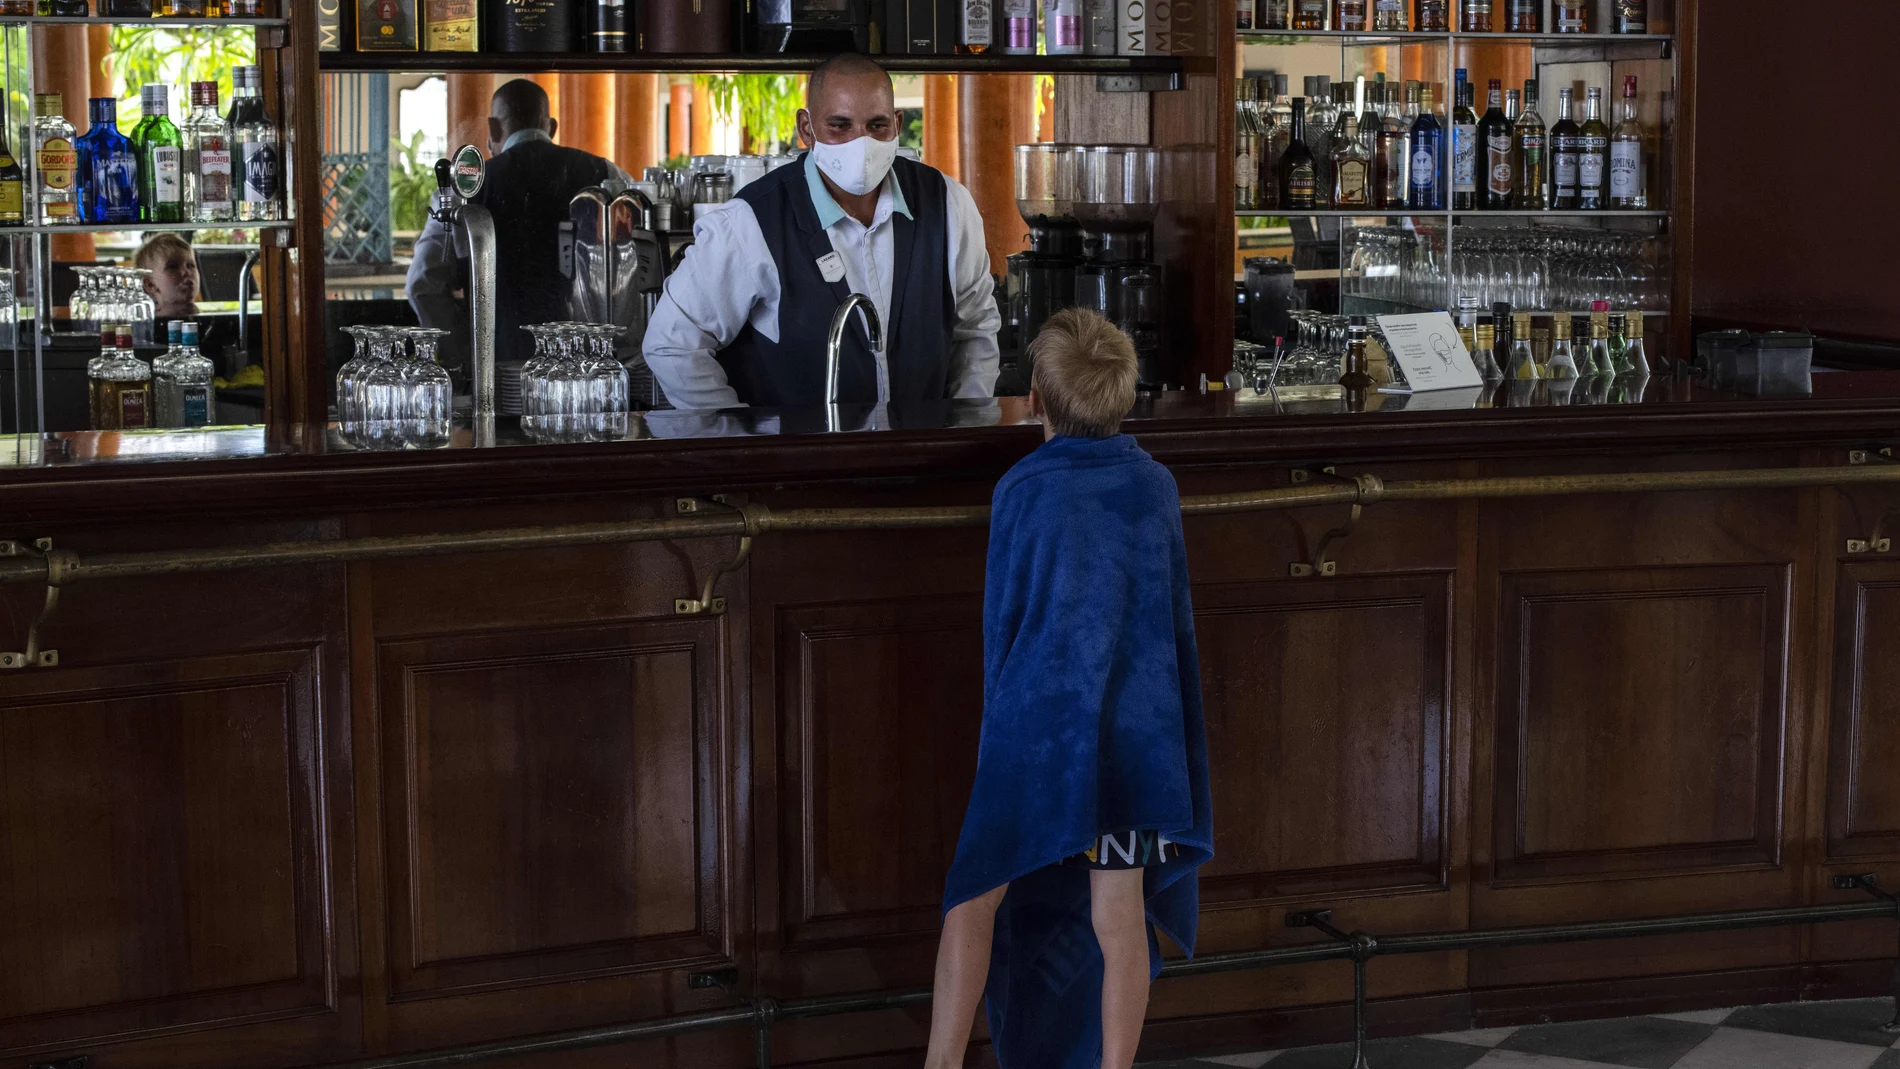 A young tourist asks a waiter for a soft drink at the Iberostar Selection Varadero hotel in Varadero, Cuba, Wednesday, Sept. 29, 2021. Authorities in Cuba have begun to relax COVID restrictions in several cities like Havana and Varadero. (AP Photo/Ramon Espinosa)